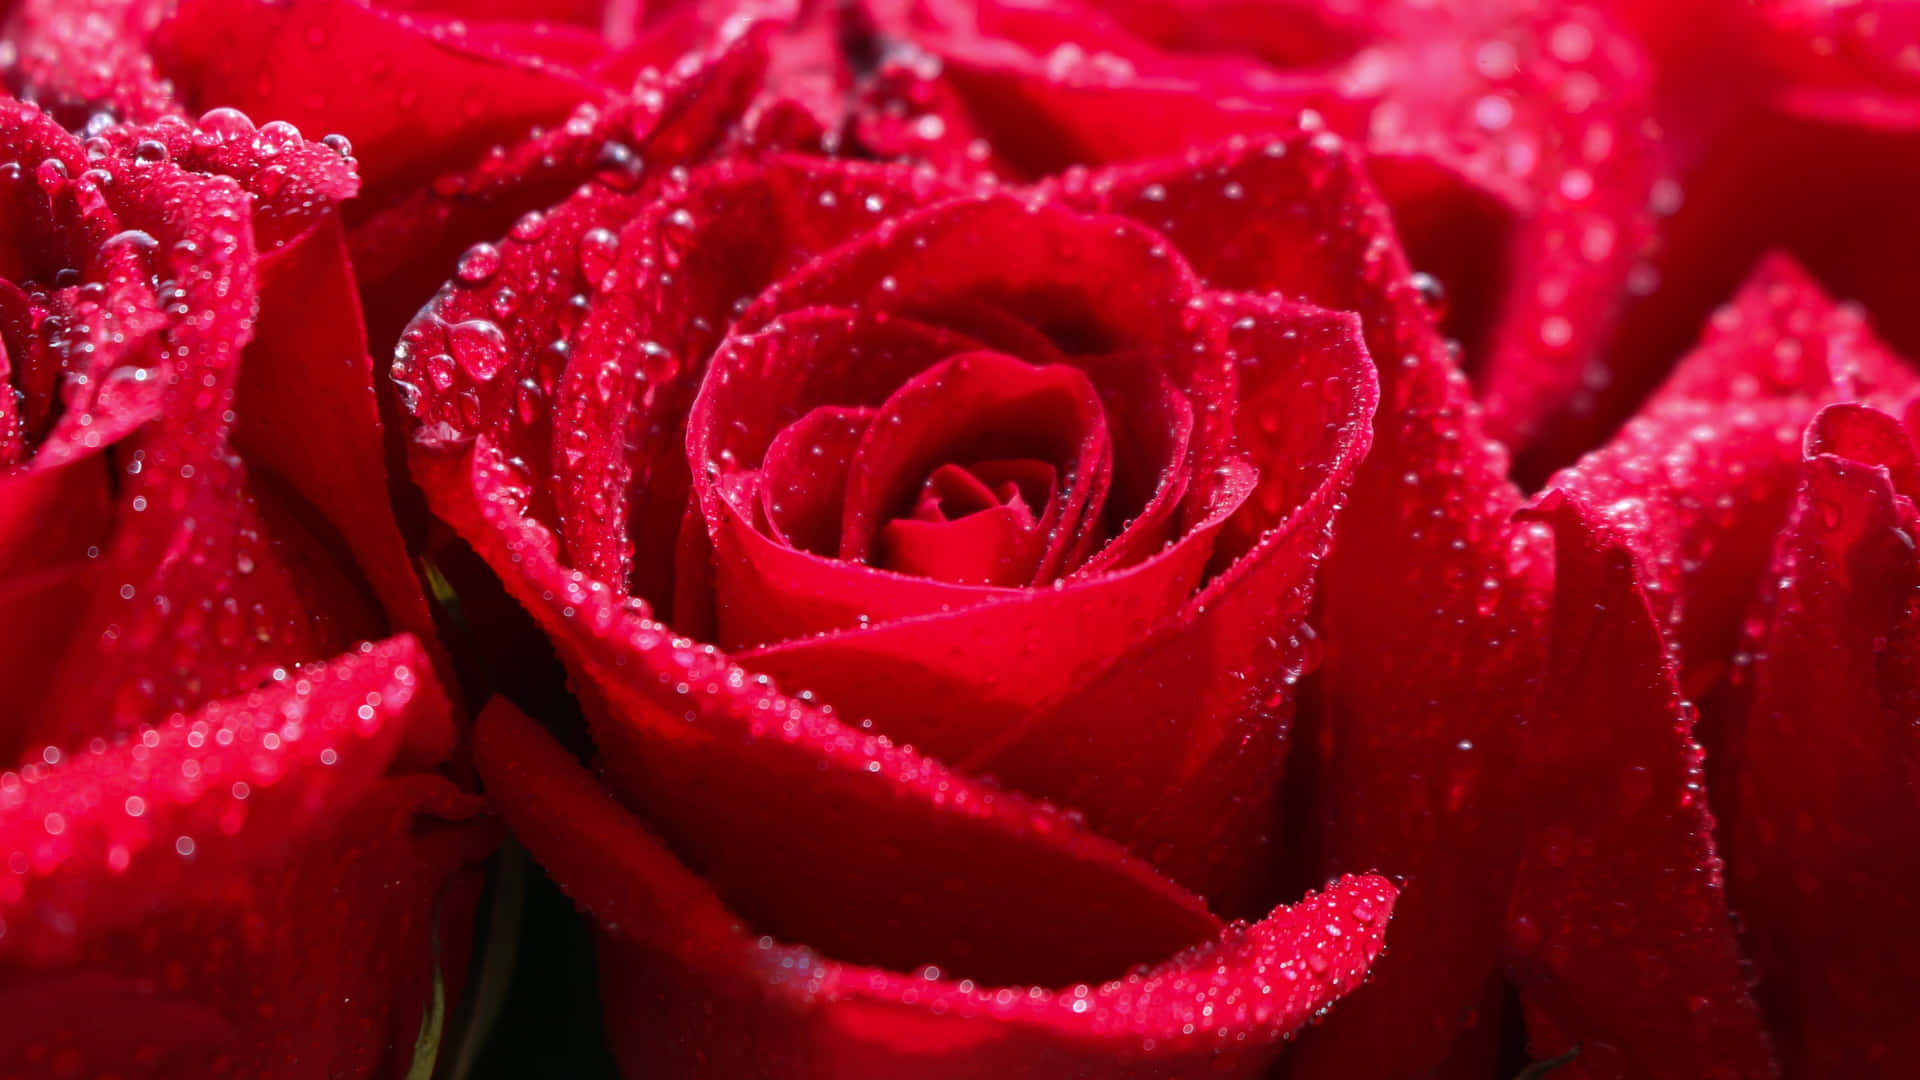 1440p Close Up Shot Rose With Droplets Background